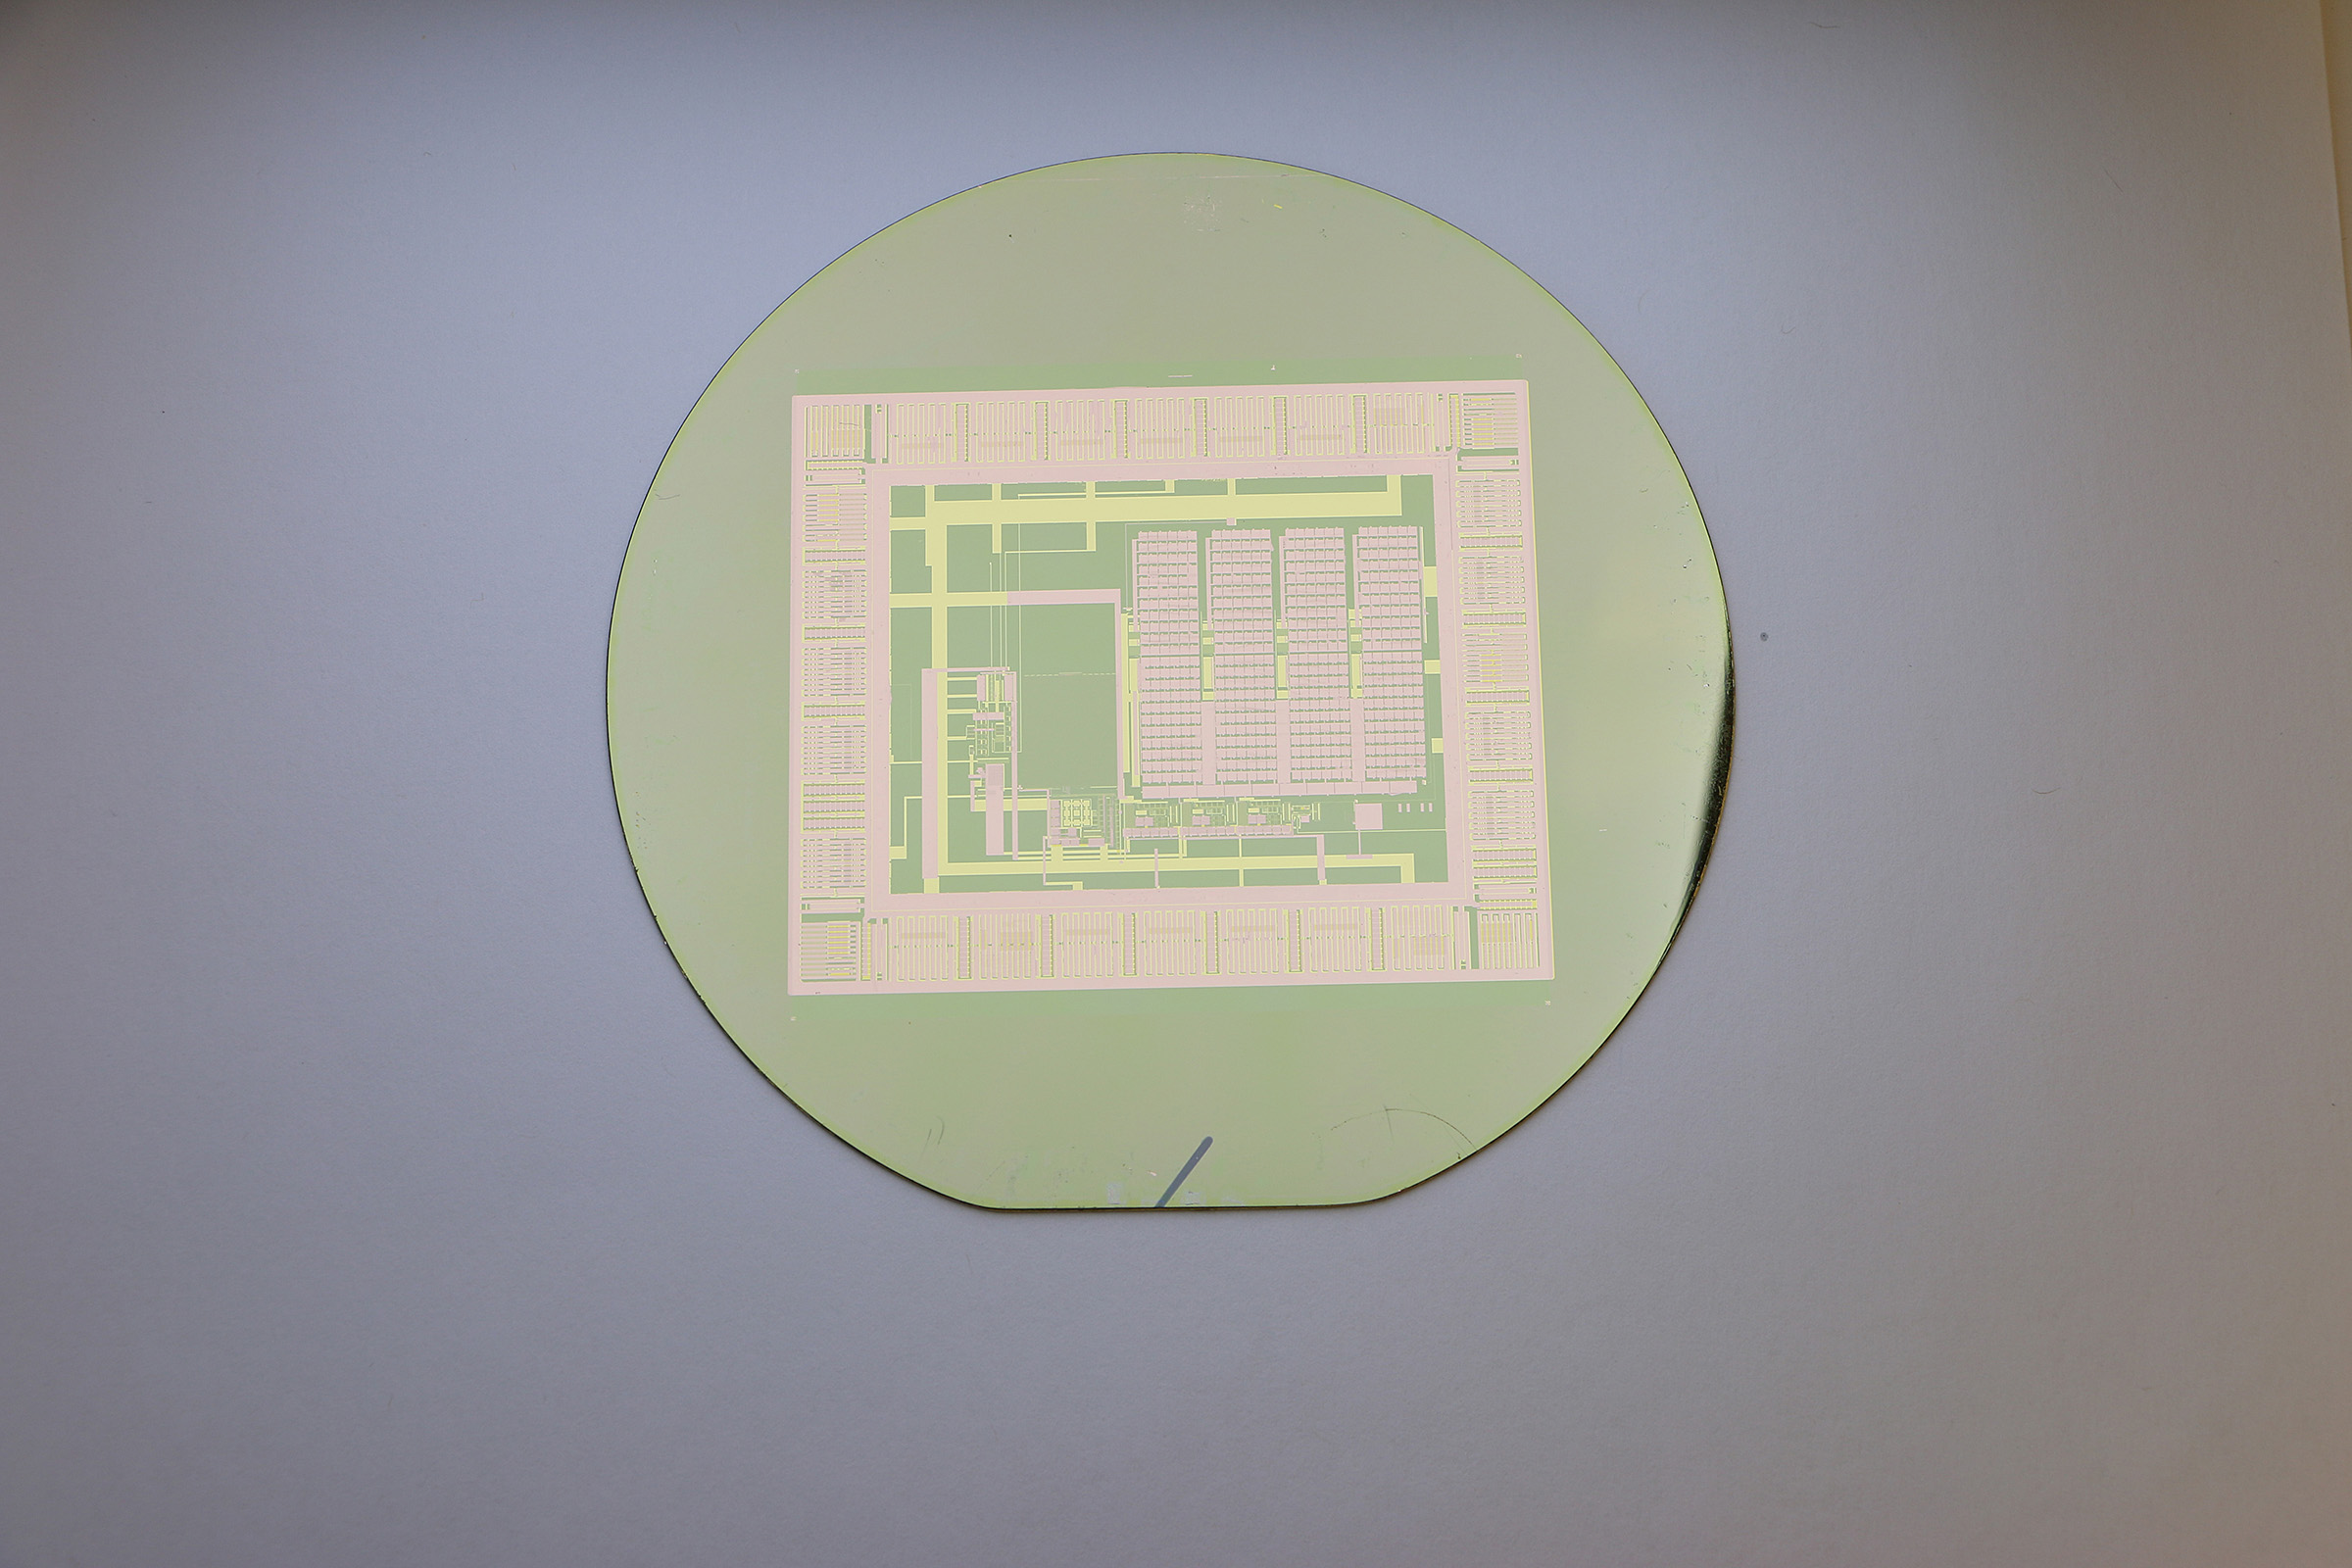 A thin-film electronic circuit can peel easily from its silicon wafer with water, making the wafer reusable for building a nearly infinite number of circuits. (Purdue University image/Chi Hwan Lee)